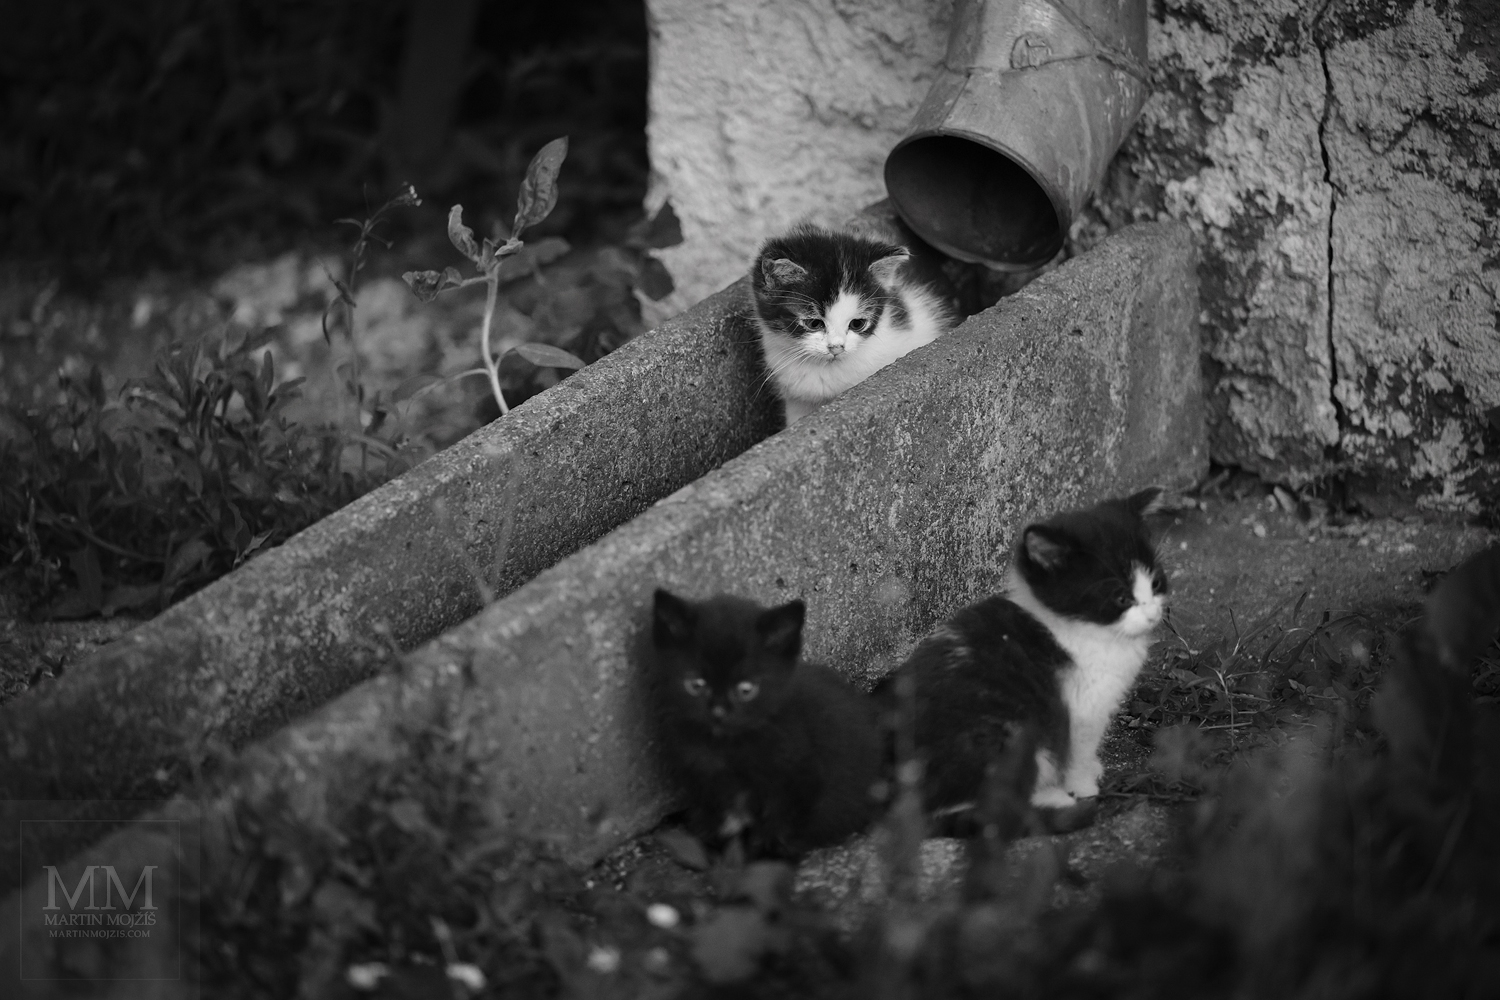 Three kittens by the gutter. Fine art black and white photograph UNDER THE GUTTER, photographed by Martin Mojzis.